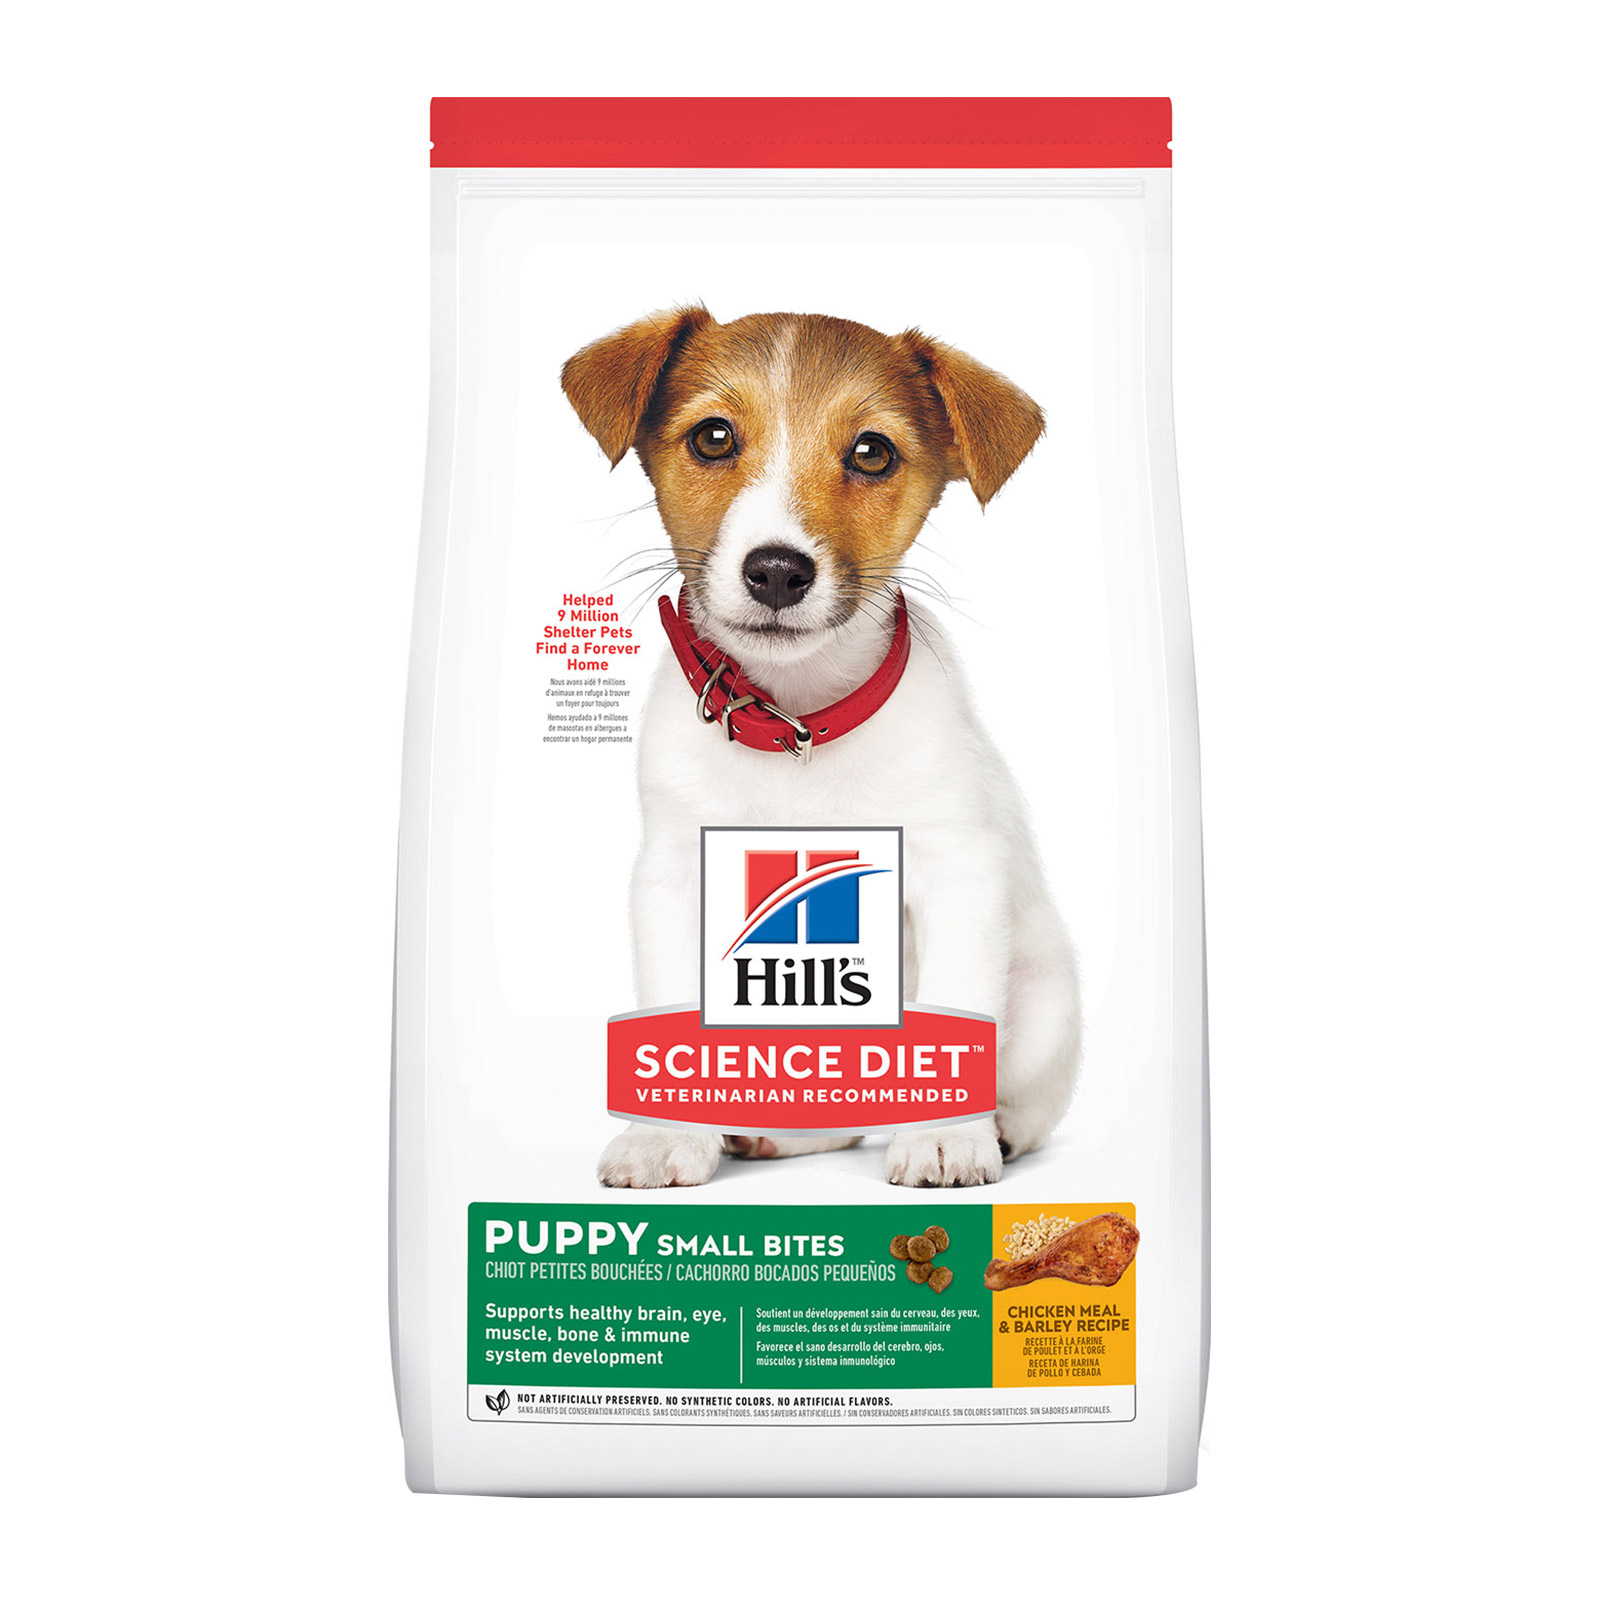 Hill's Science Diet Puppy Small Bites Chicken & Barley Dry Dog Food for Food